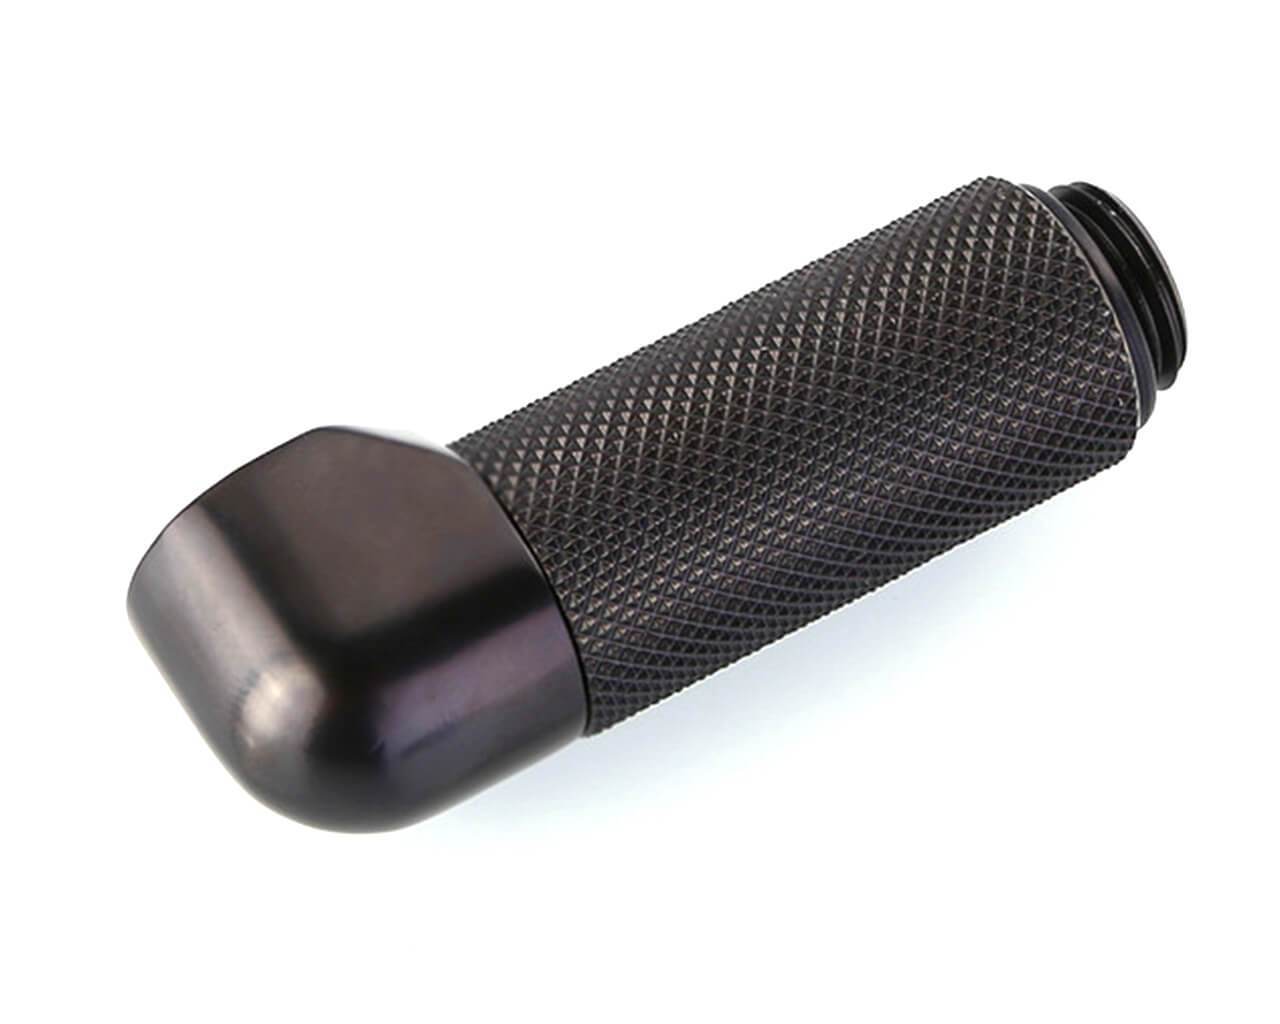 Bykski G 1/4in. Male to Female 90 Degree Rotary 35mm Extension Elbow Fitting (B-RD90-EXJ35) - PrimoChill - KEEPING IT COOL Black